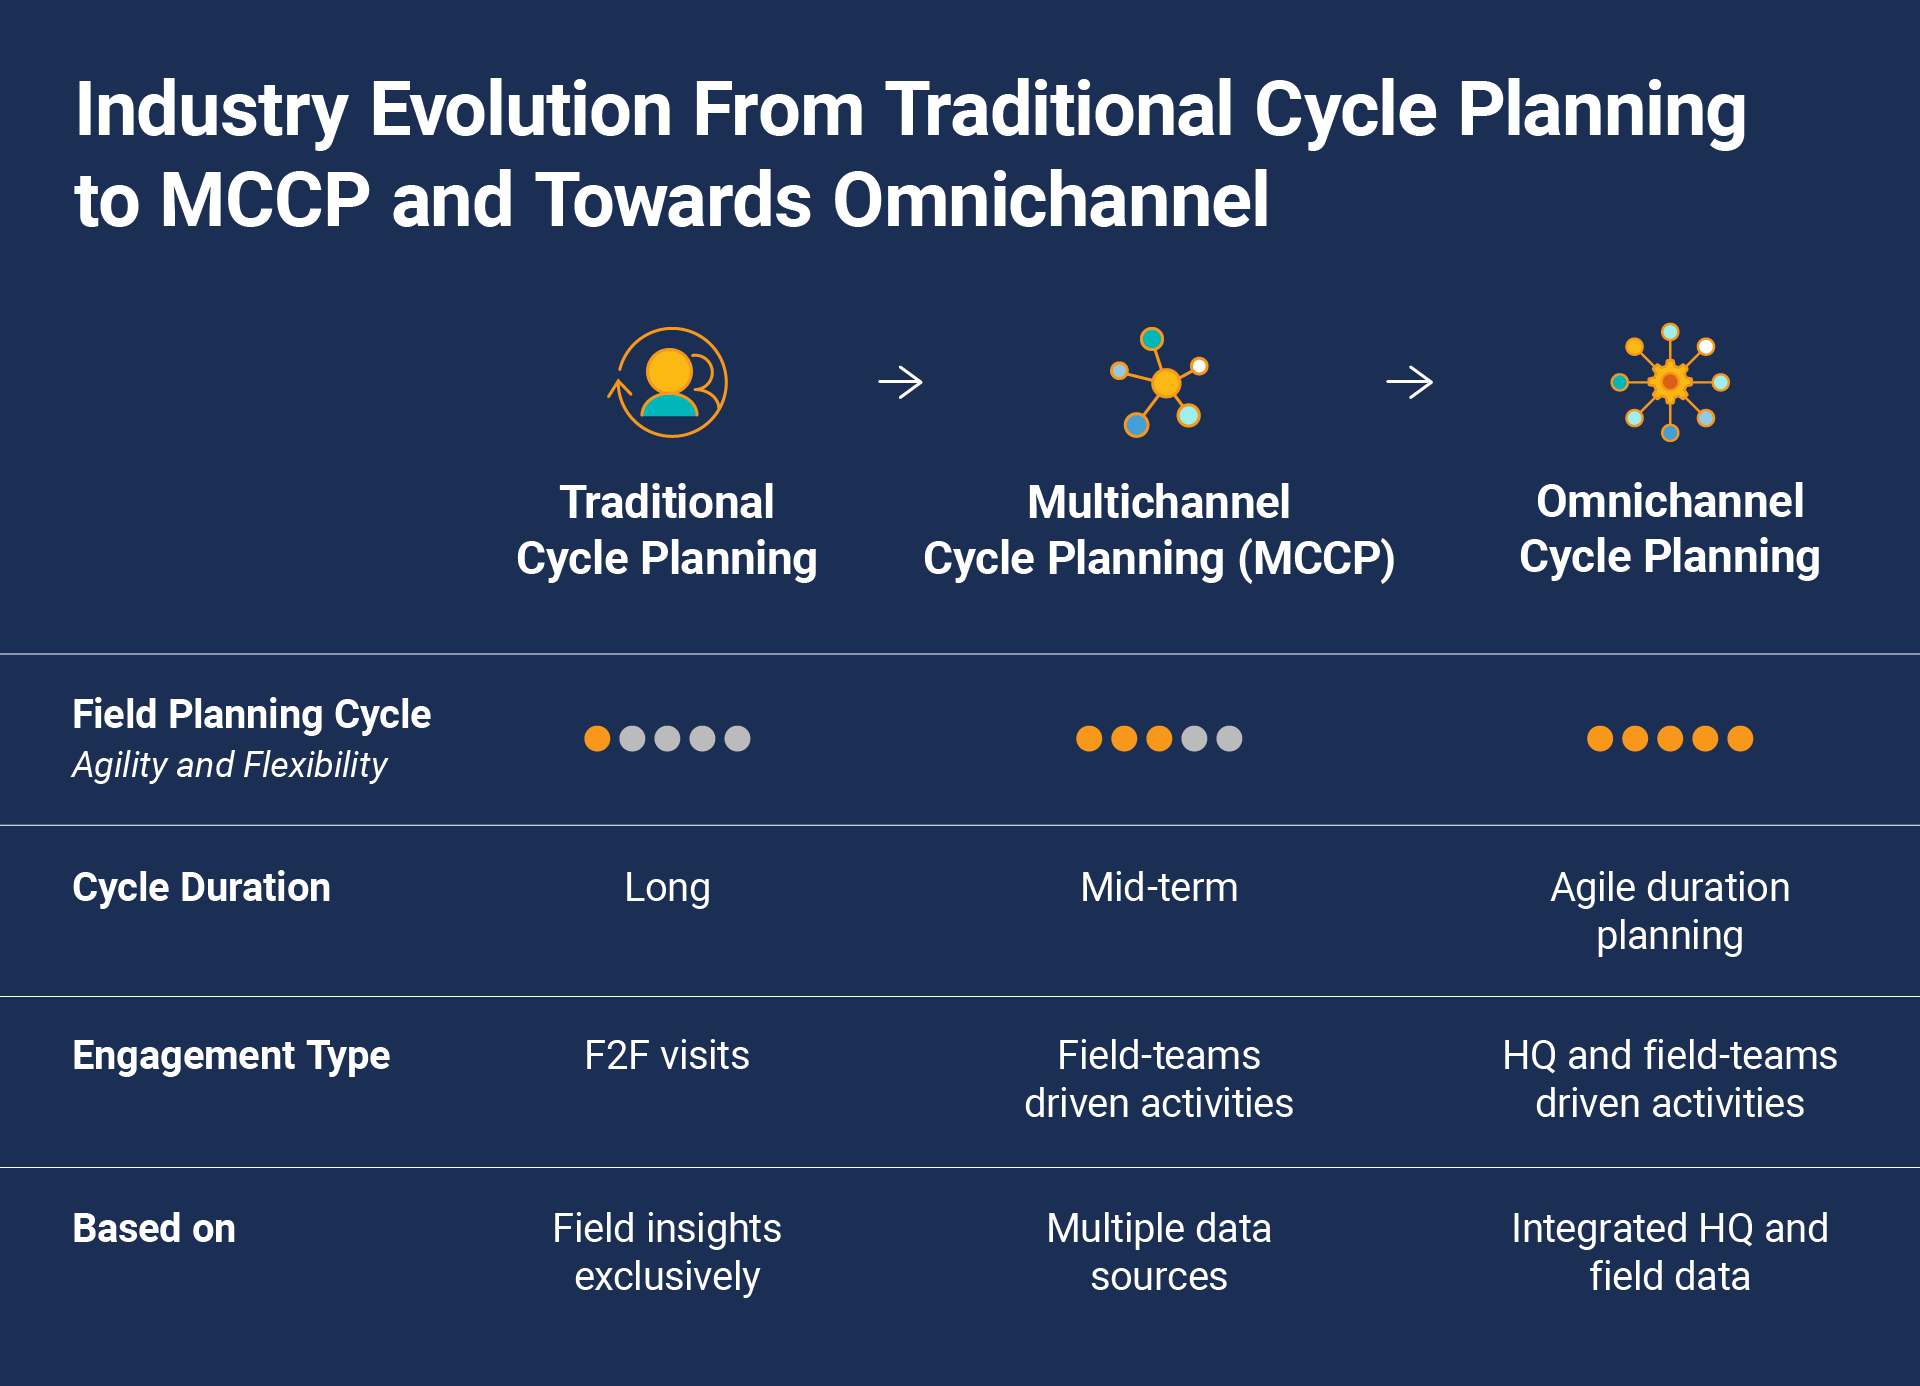 Industry Evolution From Traditional Cycle Planning to MCCP and Towards Omnichannel